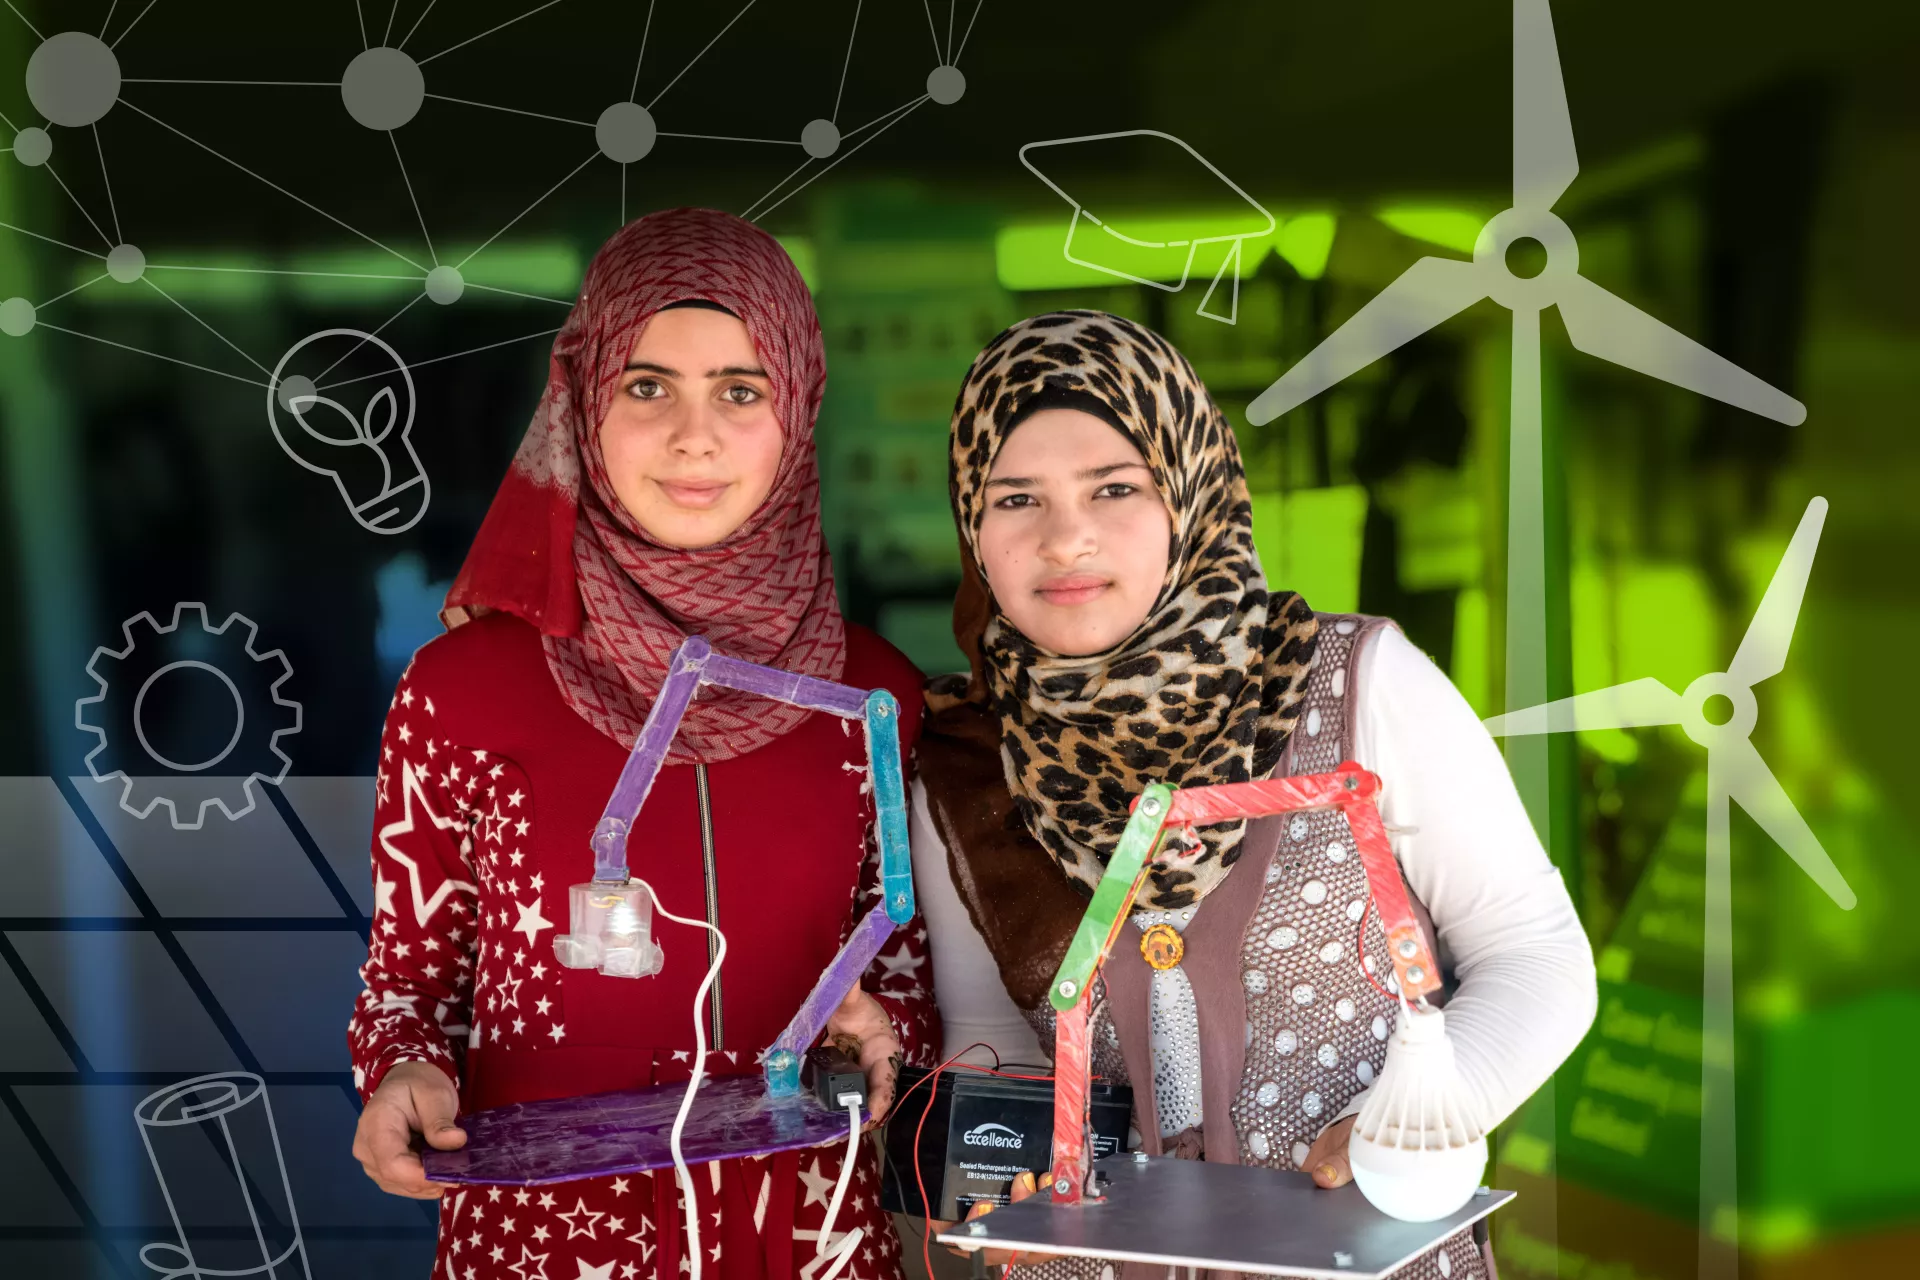 Anwar and Dina, two young Syrian refugees, show their inventions of battery-powered lamps at a refugee camp in Jordan.